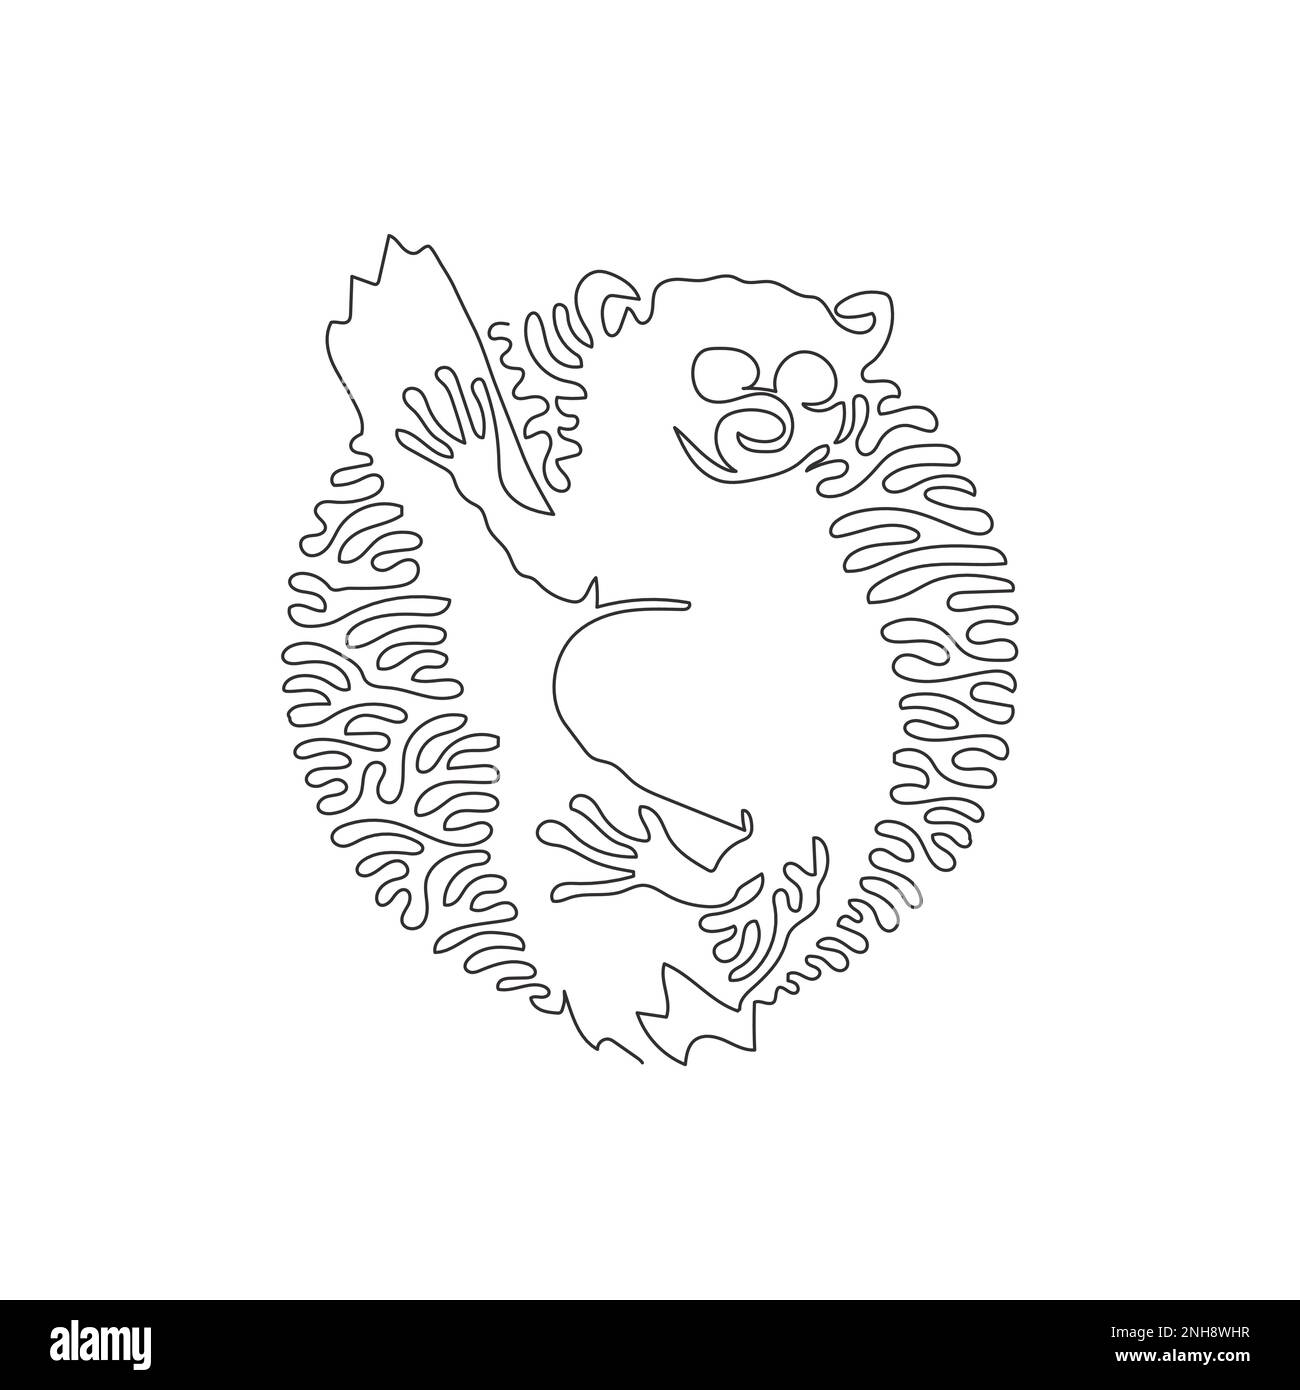 Single swirl continuous line drawing of funny tarsier. Continuous line drawing design vector illustration of a tarsier clinging vertically to the tree Stock Vector